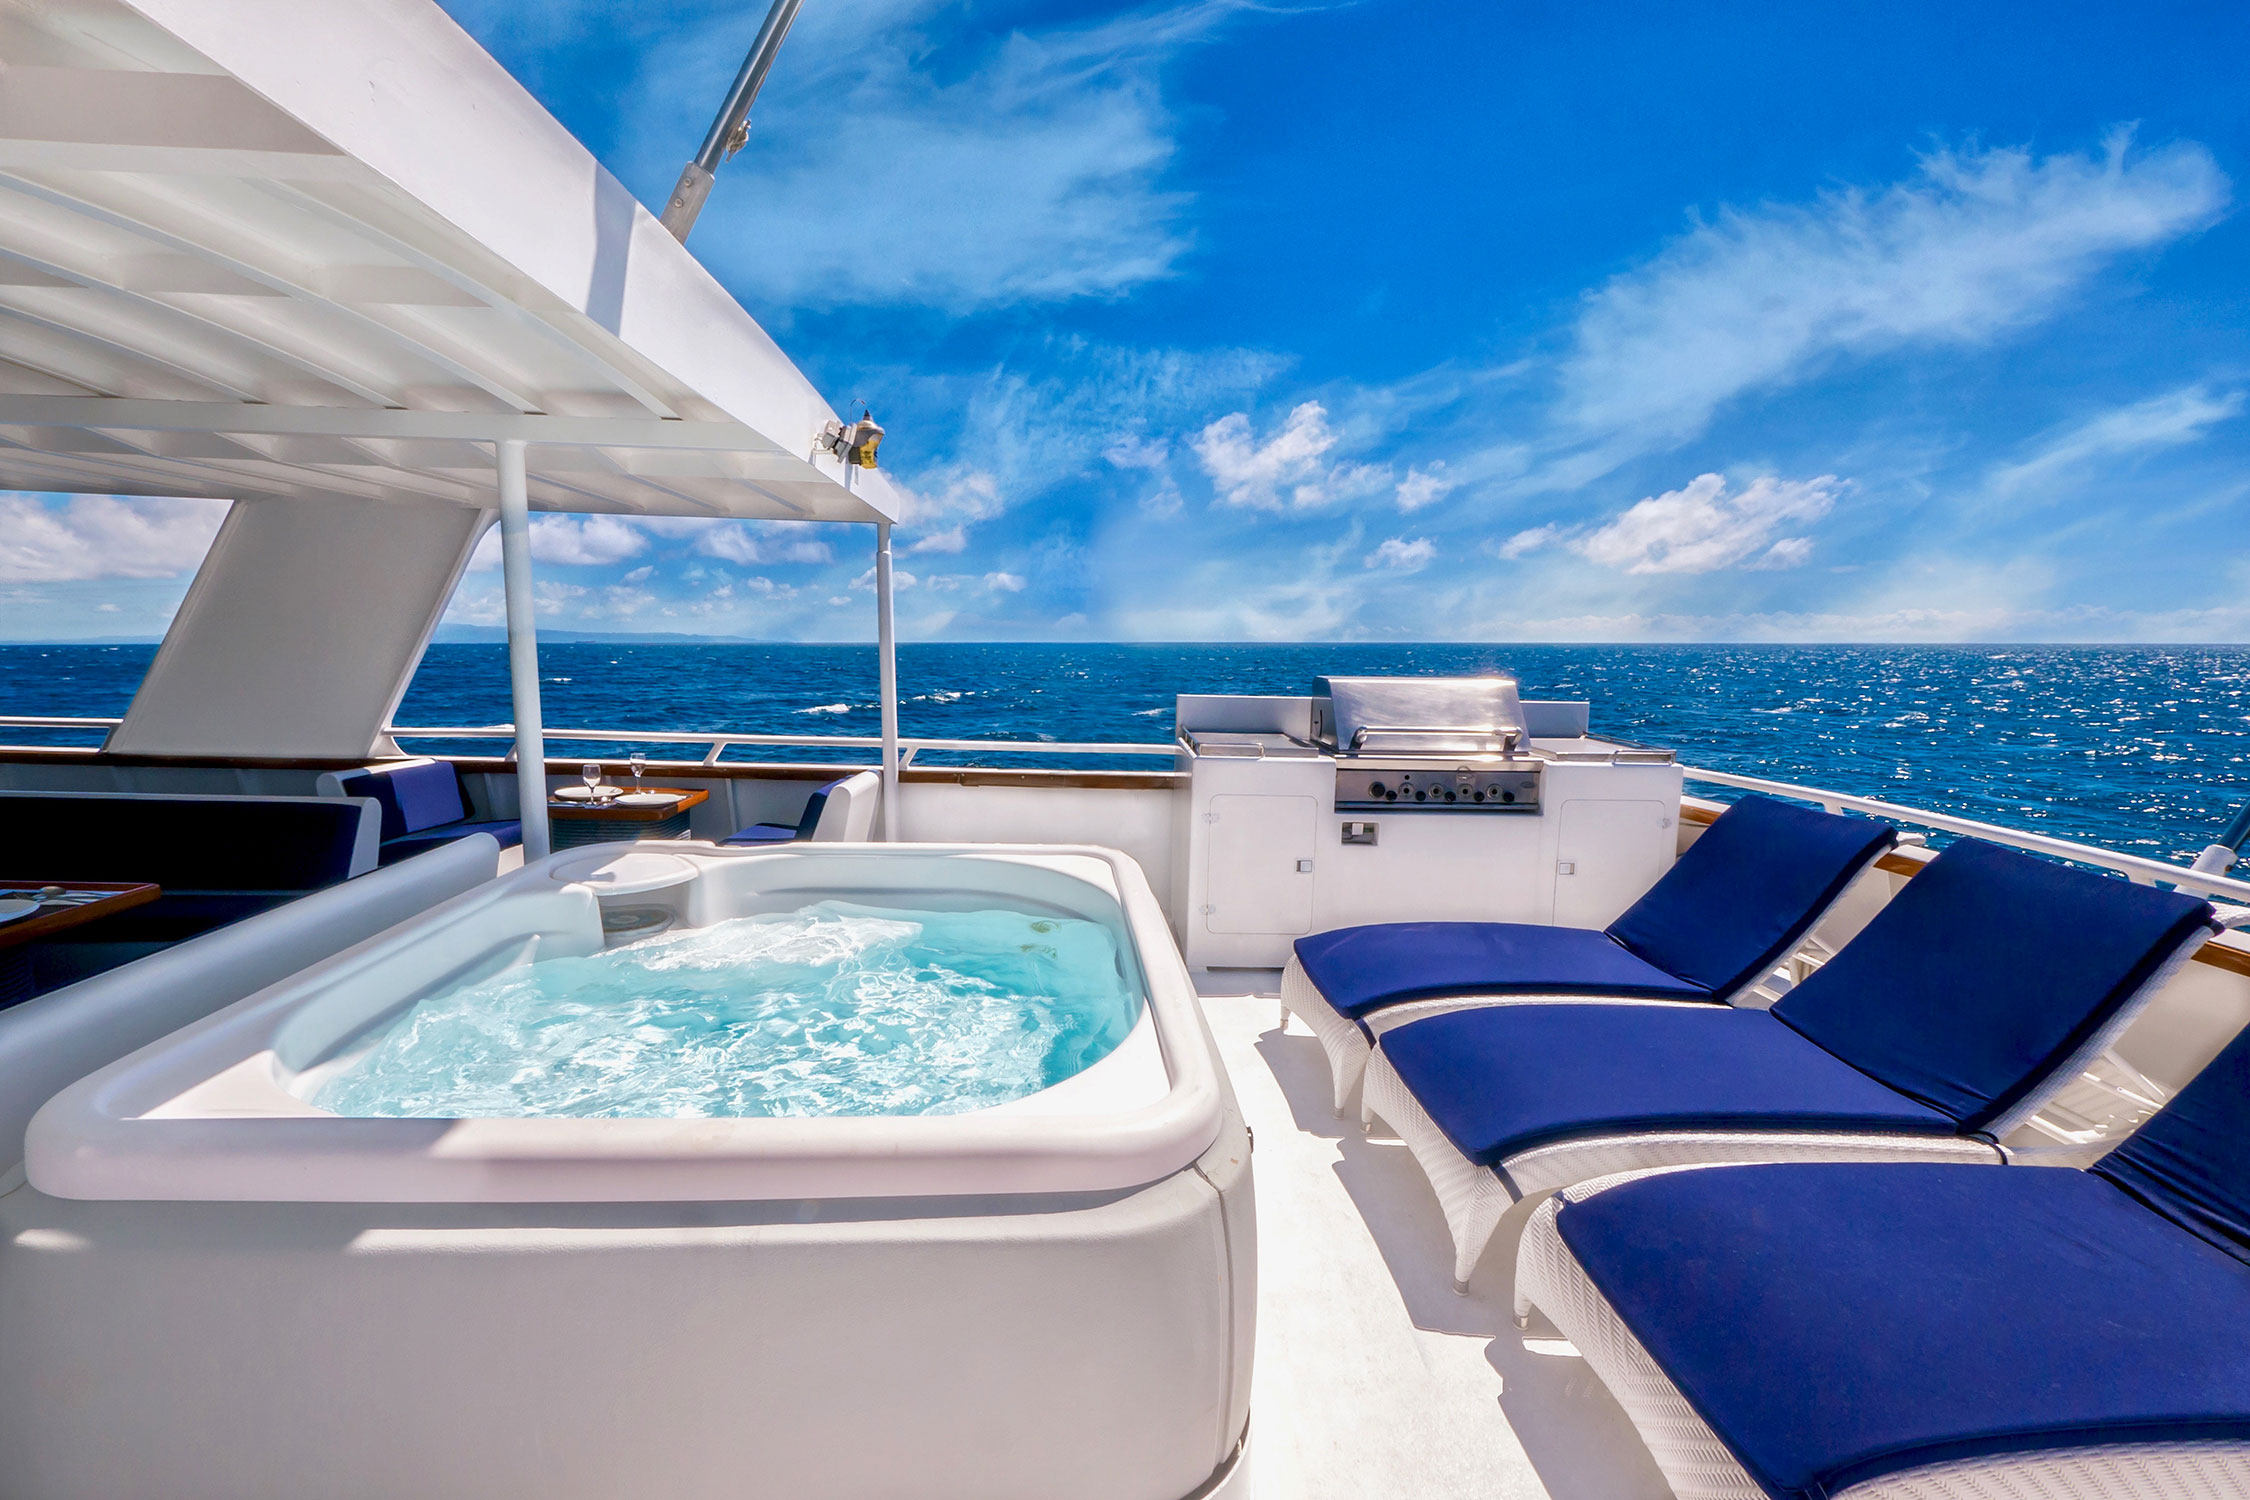 Give your ideal clients a way to travel in style through your sales funnel and they'll arrive ready to buy! Luxury yacht with jacuzzi and deck blue chairs.